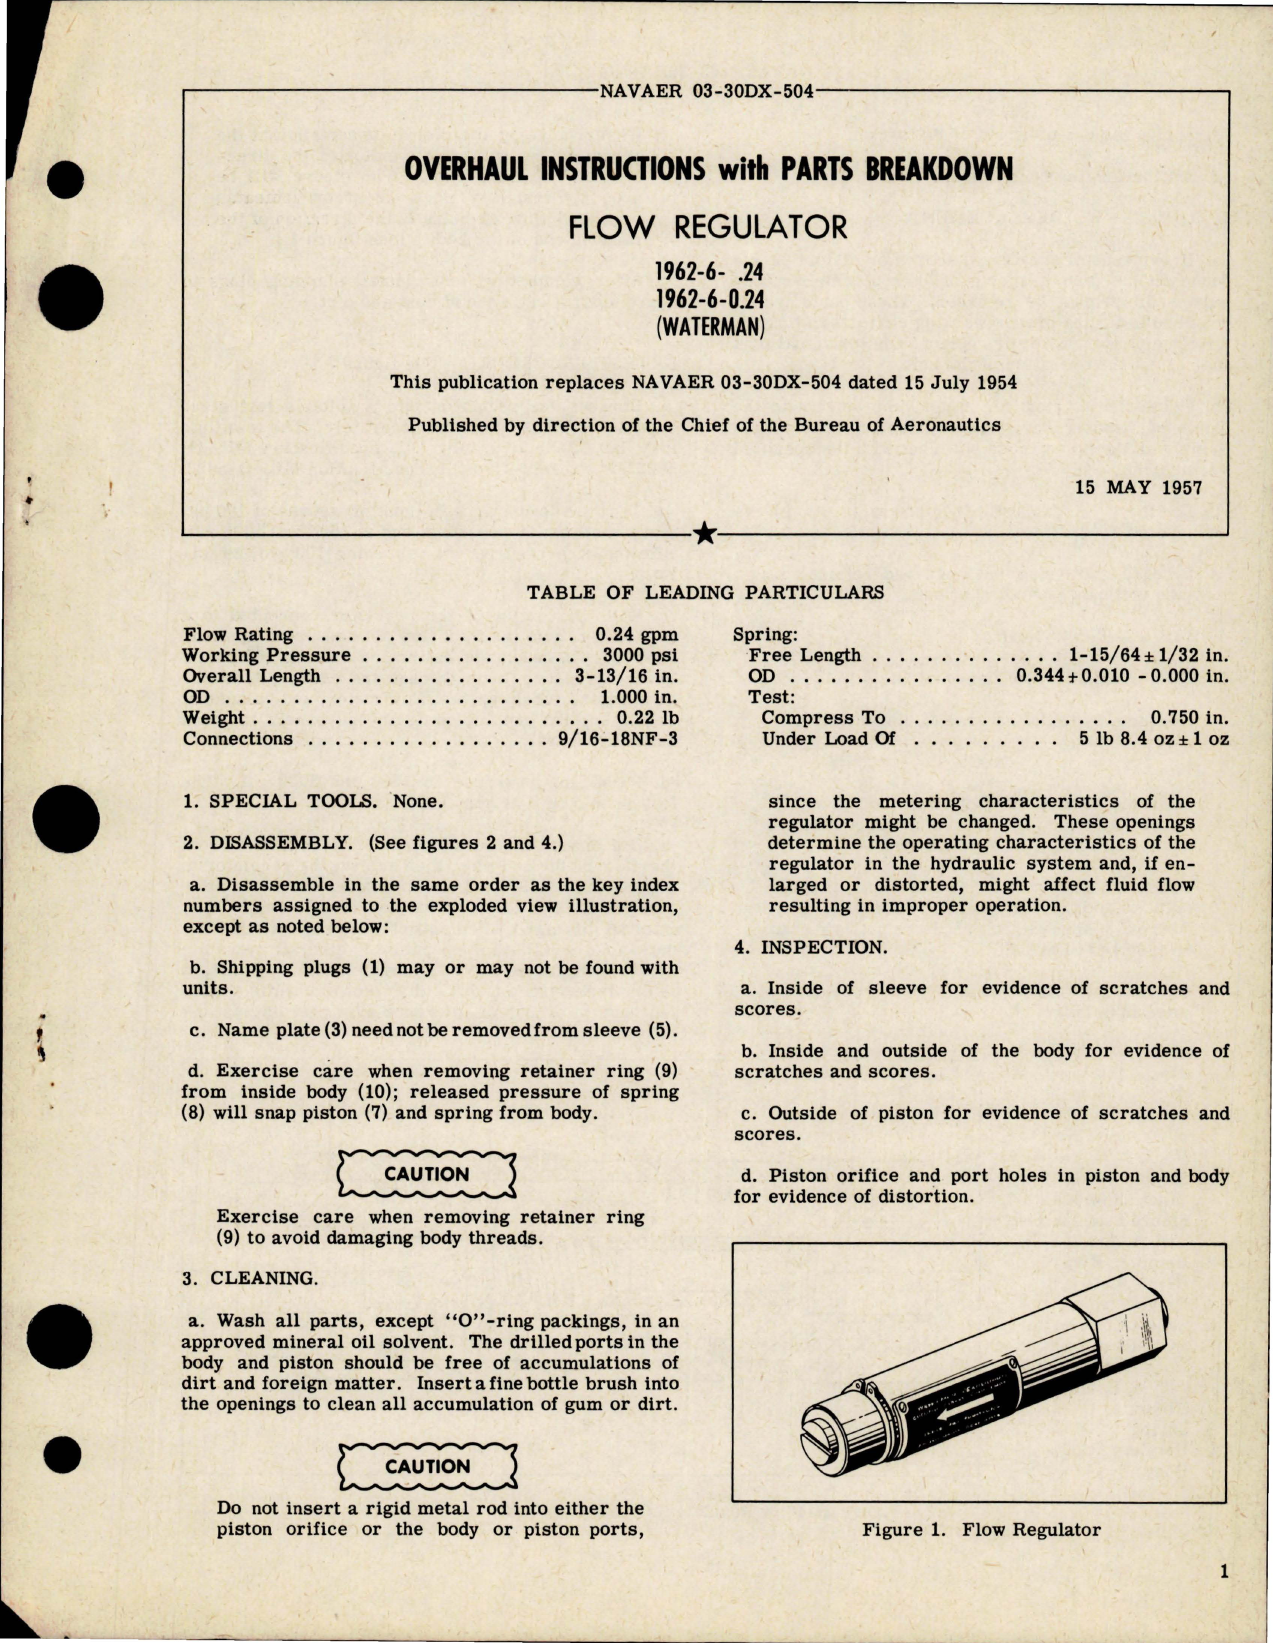 Sample page 1 from AirCorps Library document: Overhaul Instructions with Parts Breakdown for Flow Regulator - 1962-6-.24 and 1962-6-0.24 